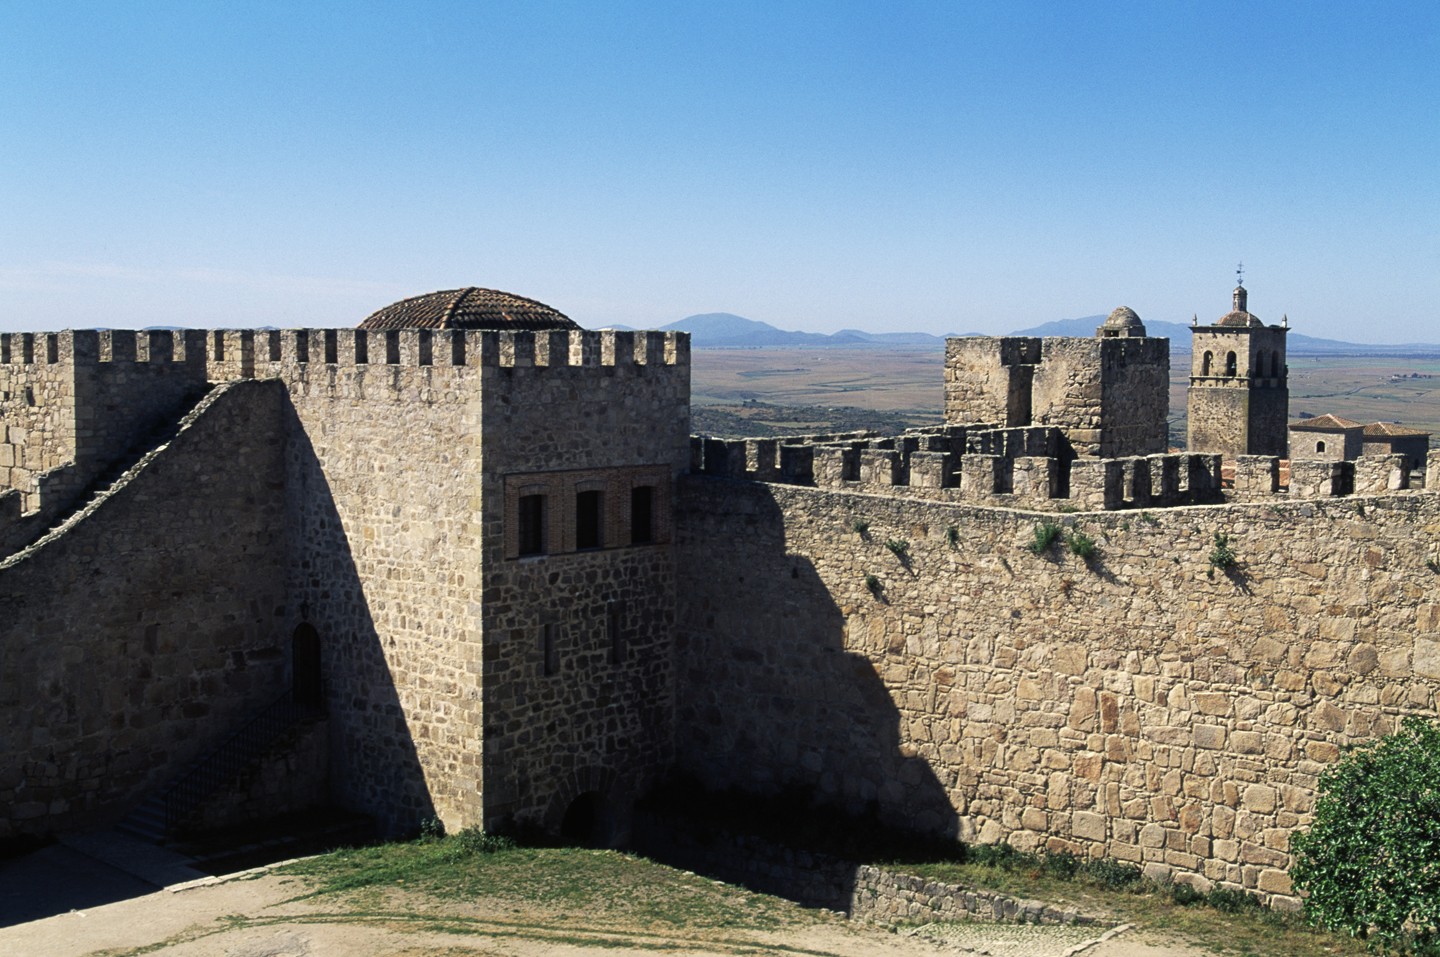 SPAIN - OCTOBER 23: Trujillo castle, Extremadura. Spain, 9th-13th century. (Photo by DeAgostini/Getty Images) (Foto: De Agostini/Getty Images)